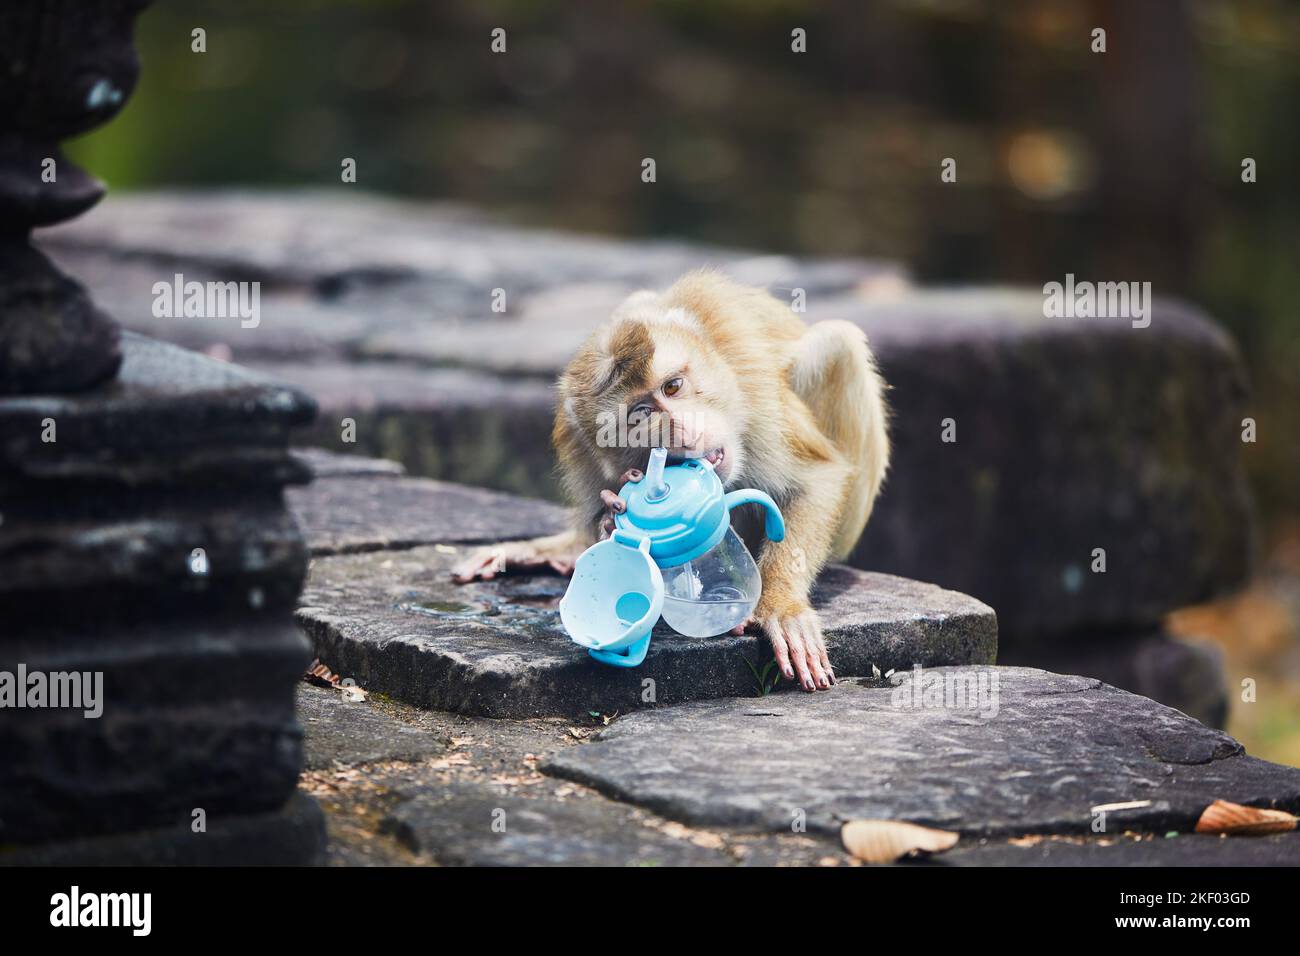 Monkey tries to drink from baby drinking bottle after stealing it from tourists. Themes of animal behavior and plastic waste in nature. Stock Photo